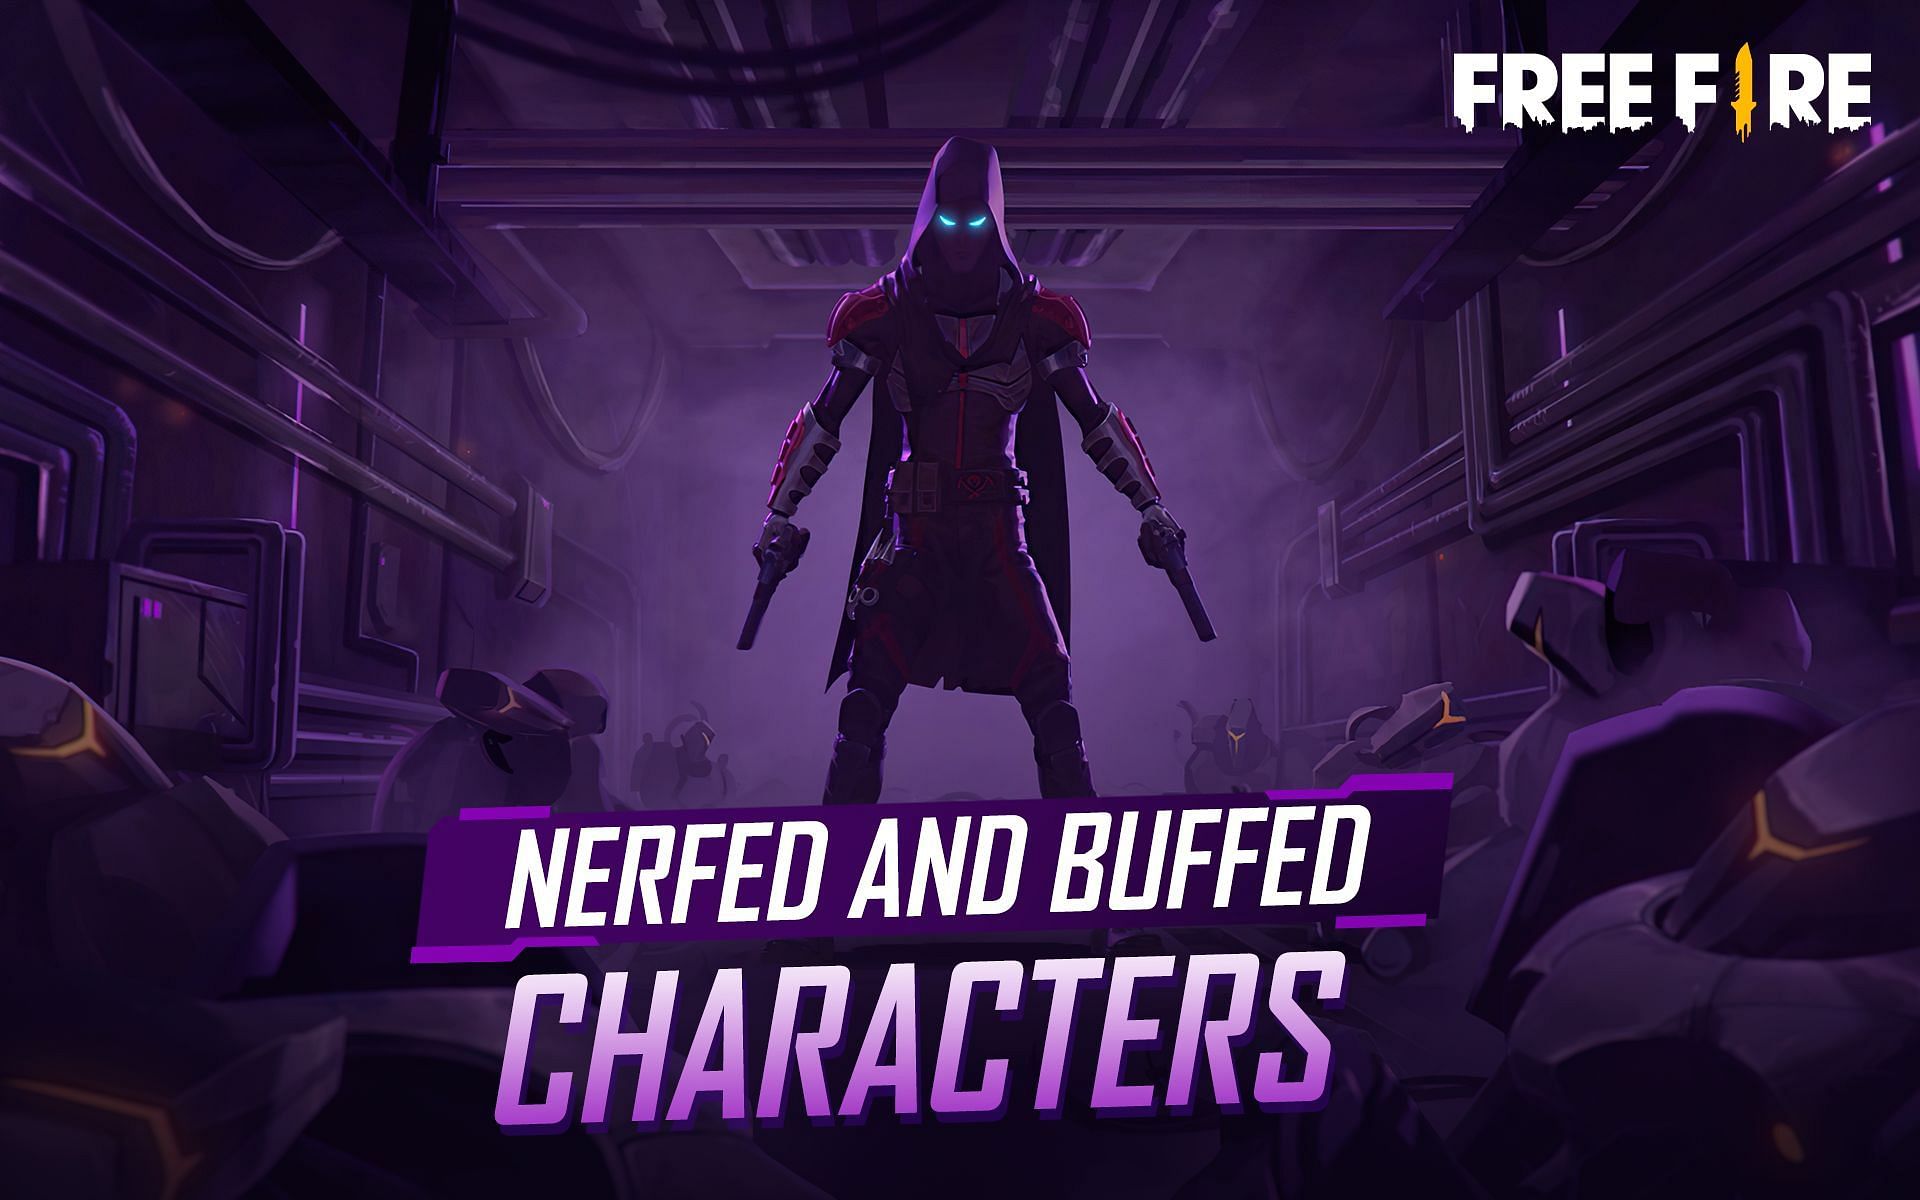 Free Fire characters that has been buffed and nerfed (Image via Sportskeeda)